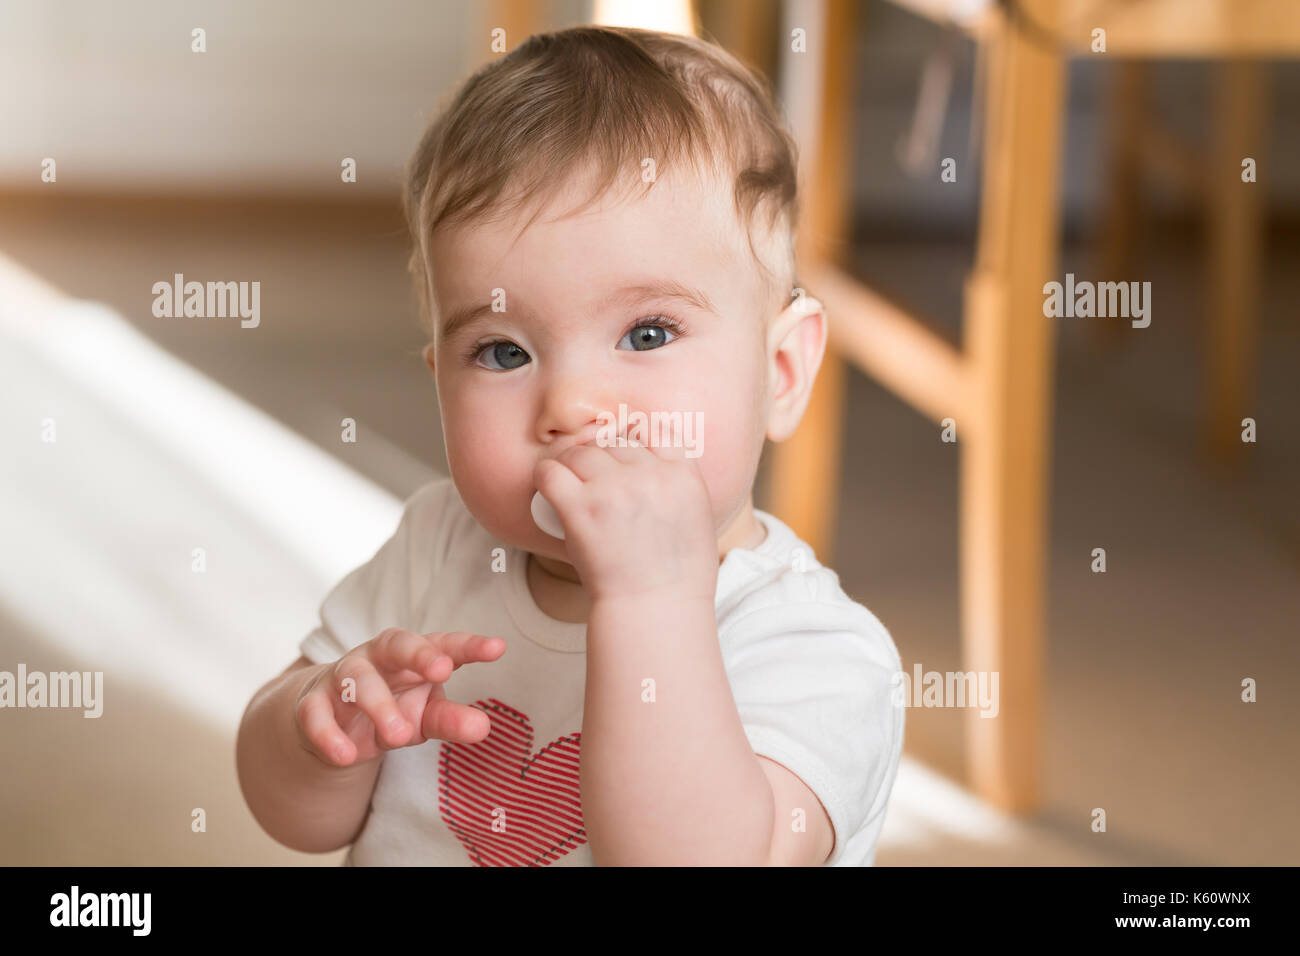 Beautiful little baby with hand near mouth. Close up portrait in home. Stock Photo